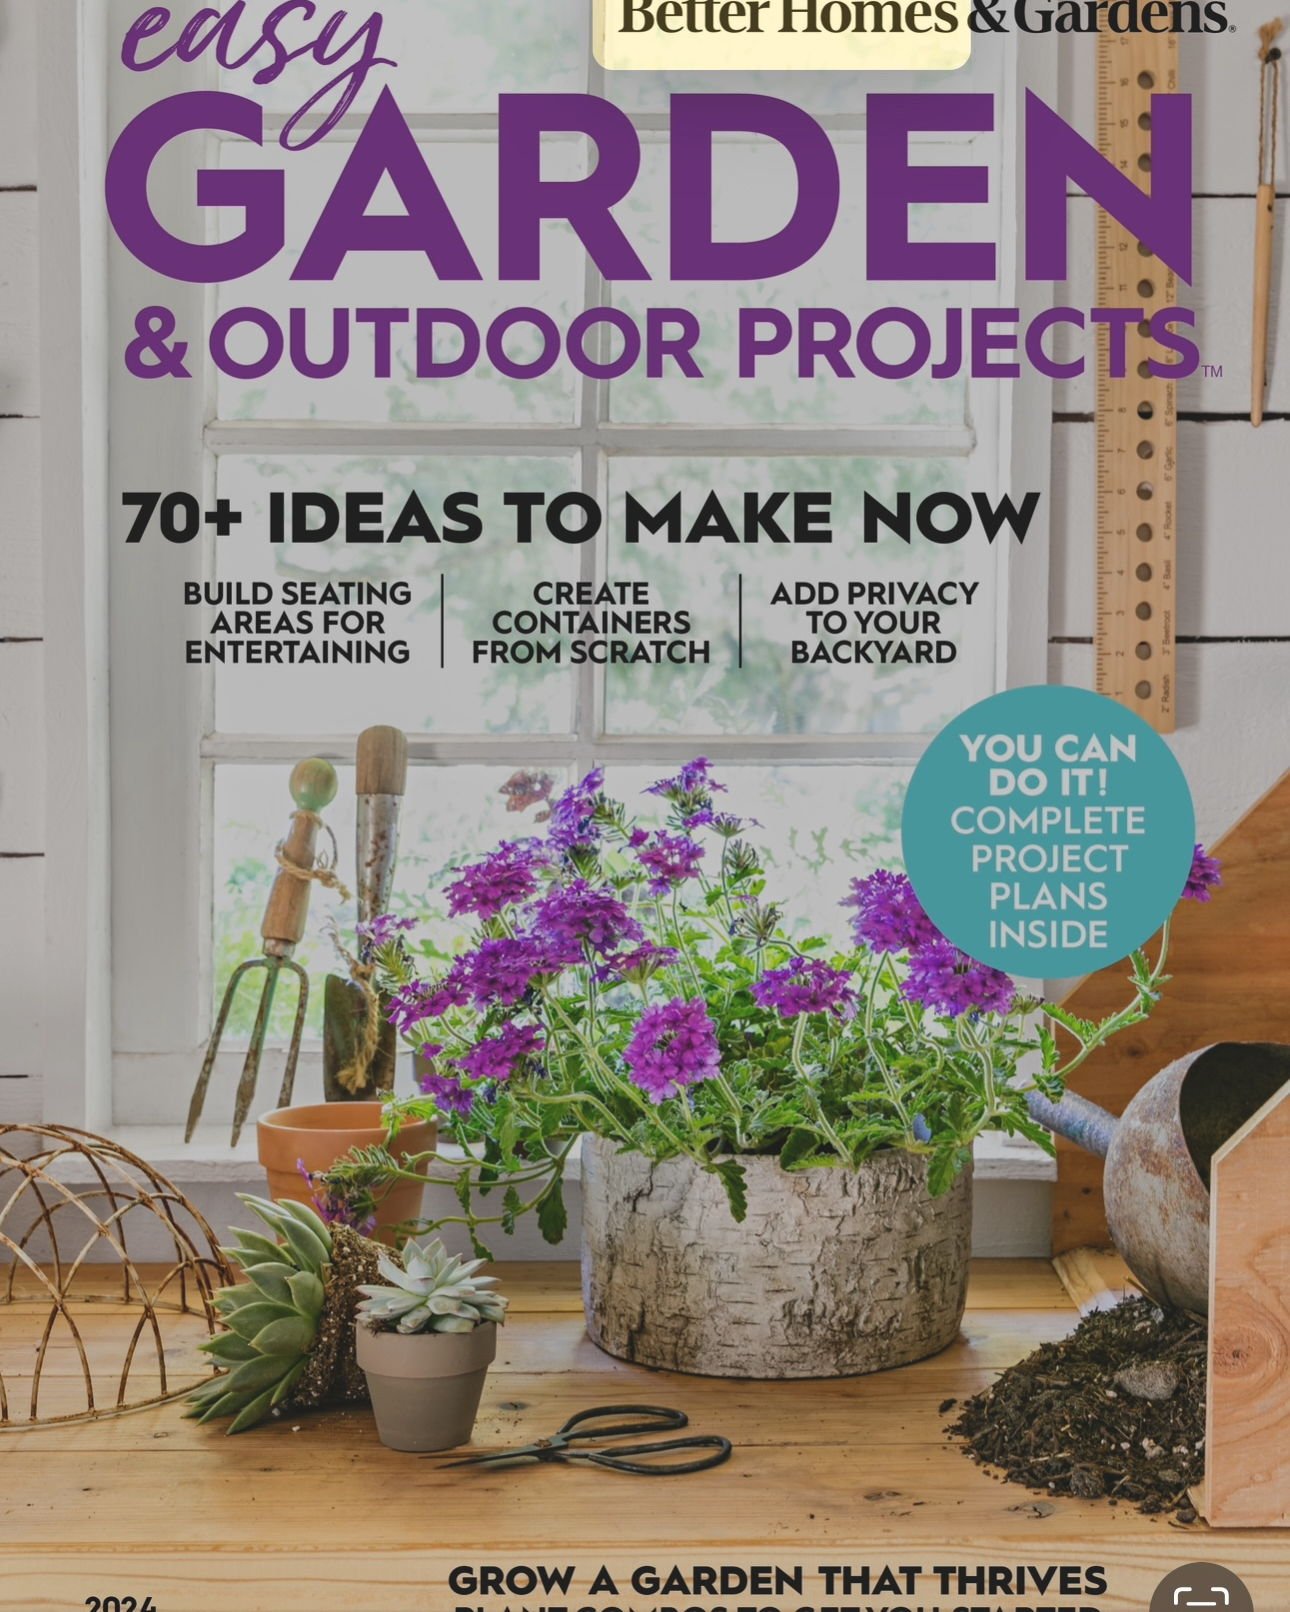 We are extremely excited to be featured in @betterhomes&amp;gardens Spring issue! If you are looking for garden and outdoor decorating ideas&hellip;pick up a copy and have a 👀 

#betterhomes&amp;gardens
#gardening #gardeningmakesmehappy